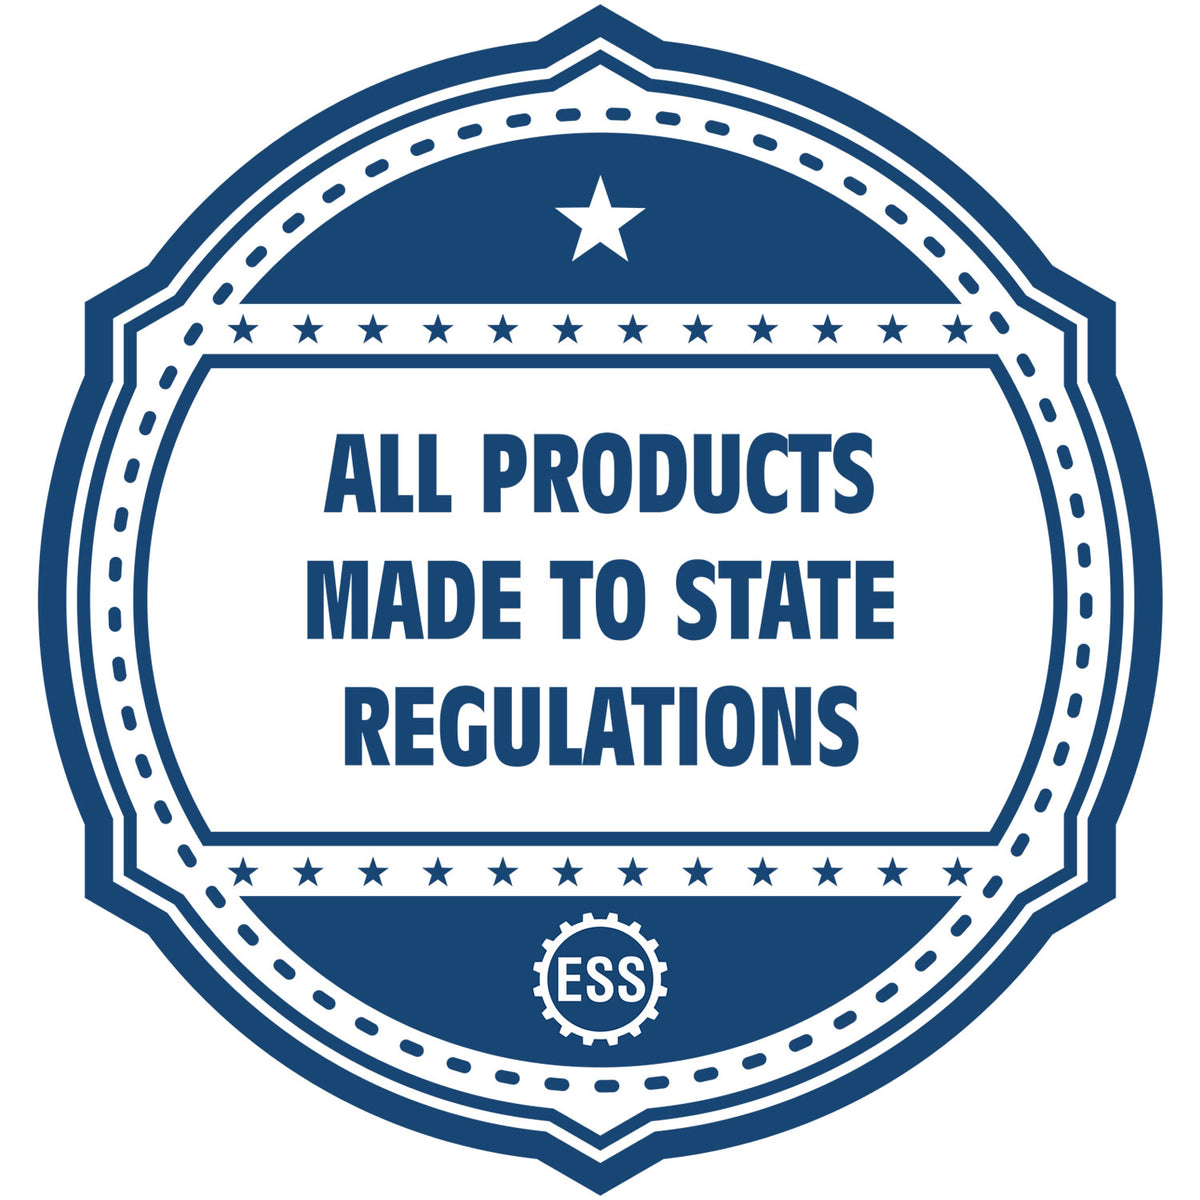 An icon or badge element for the Handheld Arizona Land Surveyor Seal showing that this product is made in compliance with state regulations.